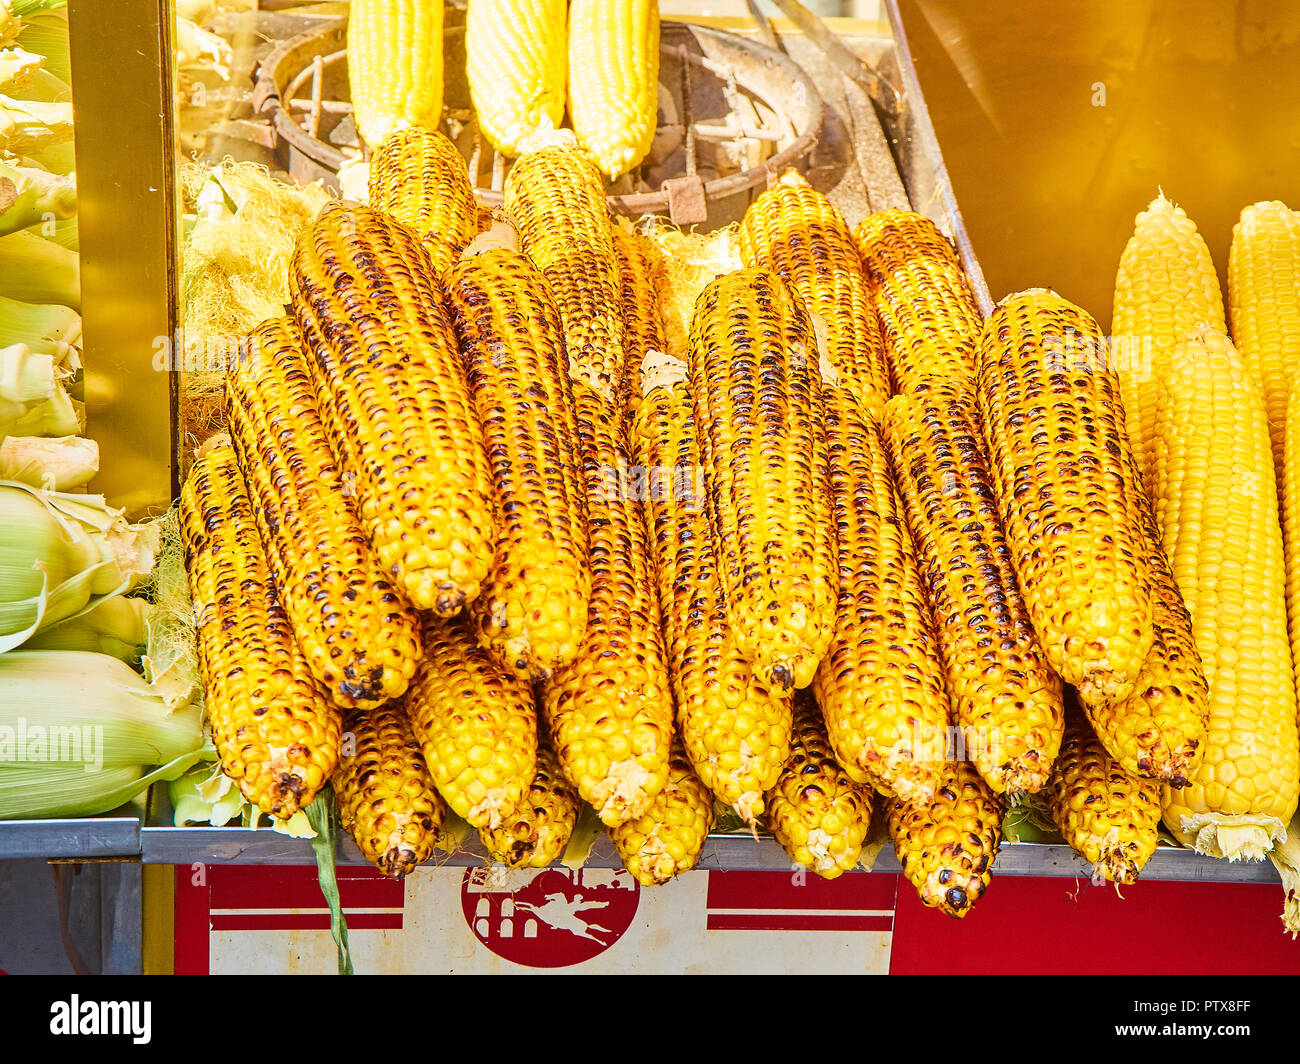 Istanbul, Turkey - July 11, 2018. A lot of grilled corn cobs on a street stall of Eminonu, a former district of Istanbul, Turkey. Stock Photo